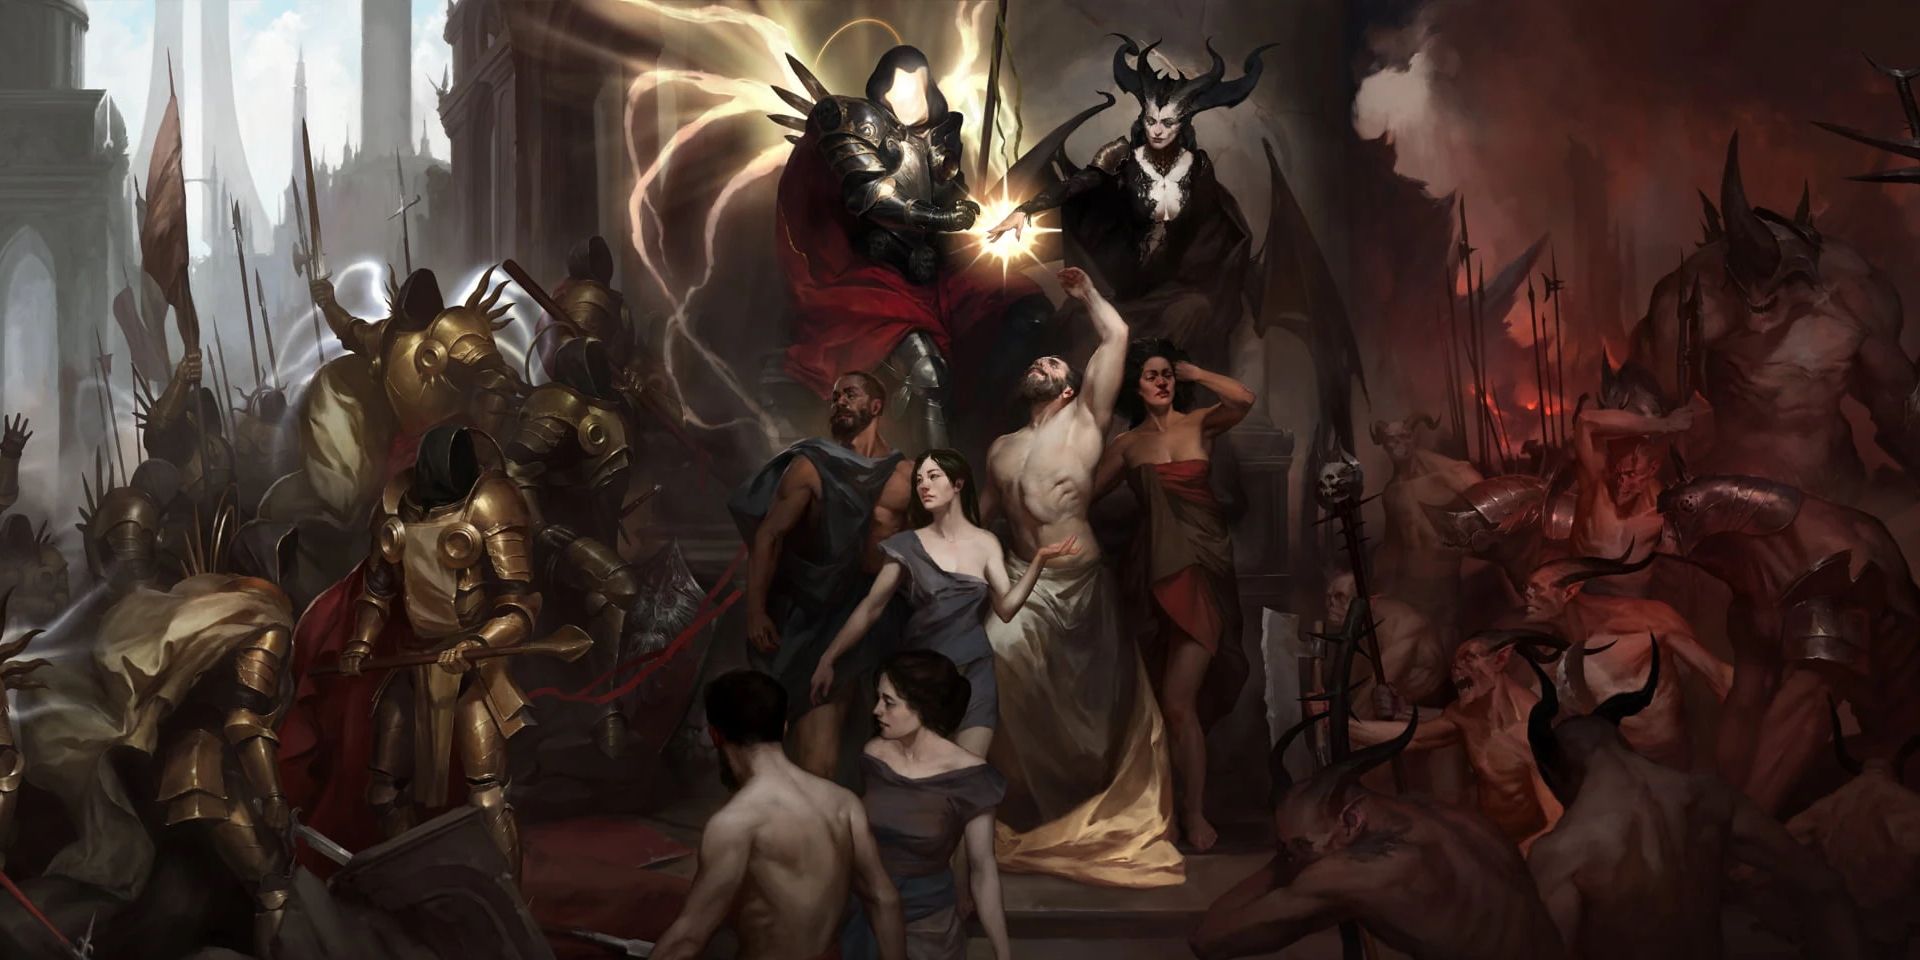 Inarius and his angel followers, Lilith and her demon followers, and their proto-human children, the Nephelam.